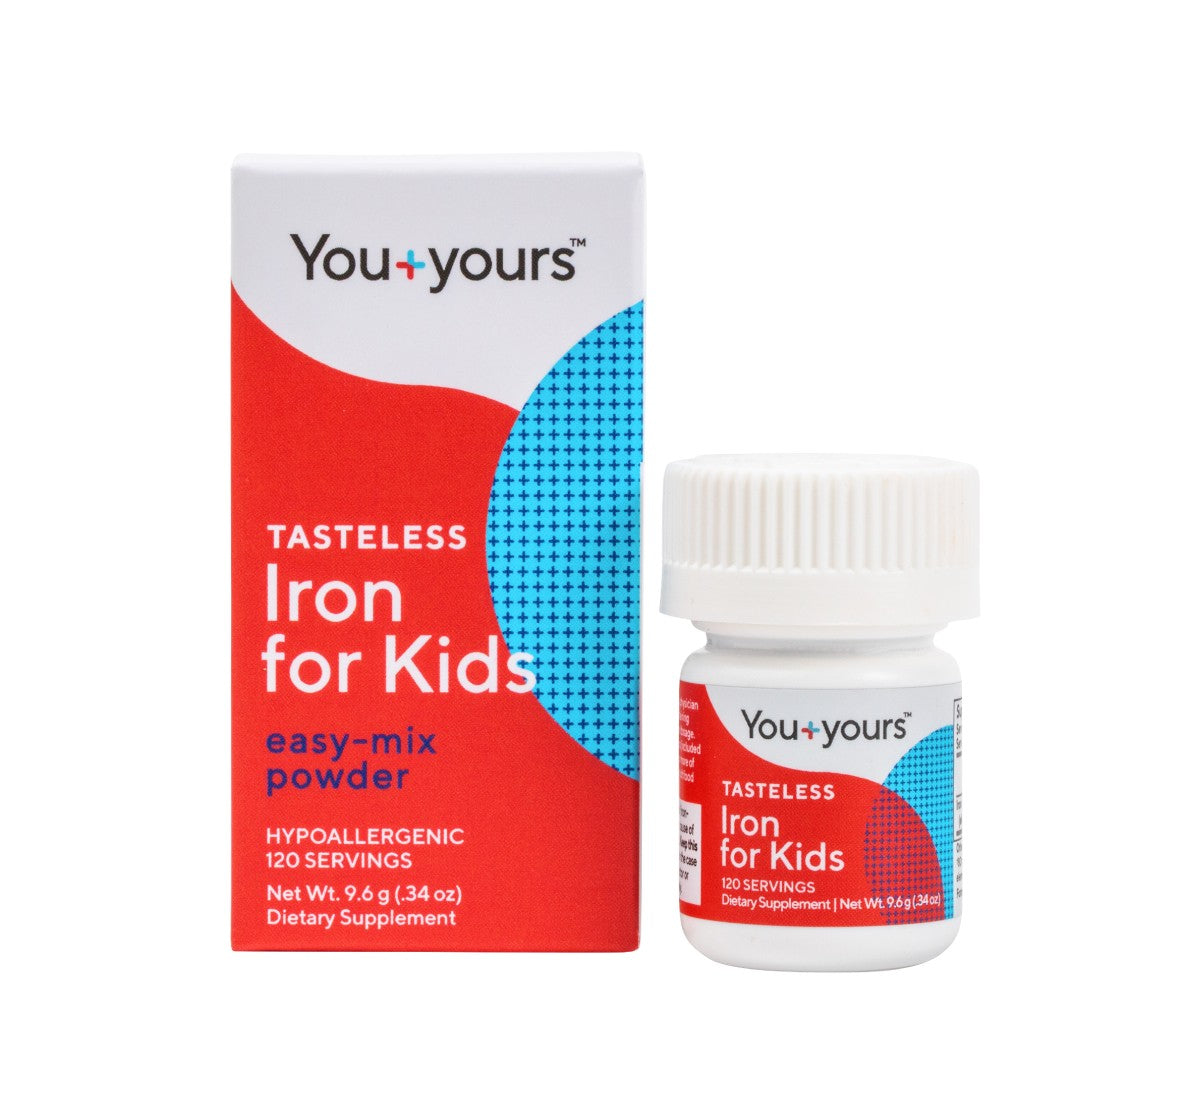 Tasteless Iron Powder for Kids by You+yours™